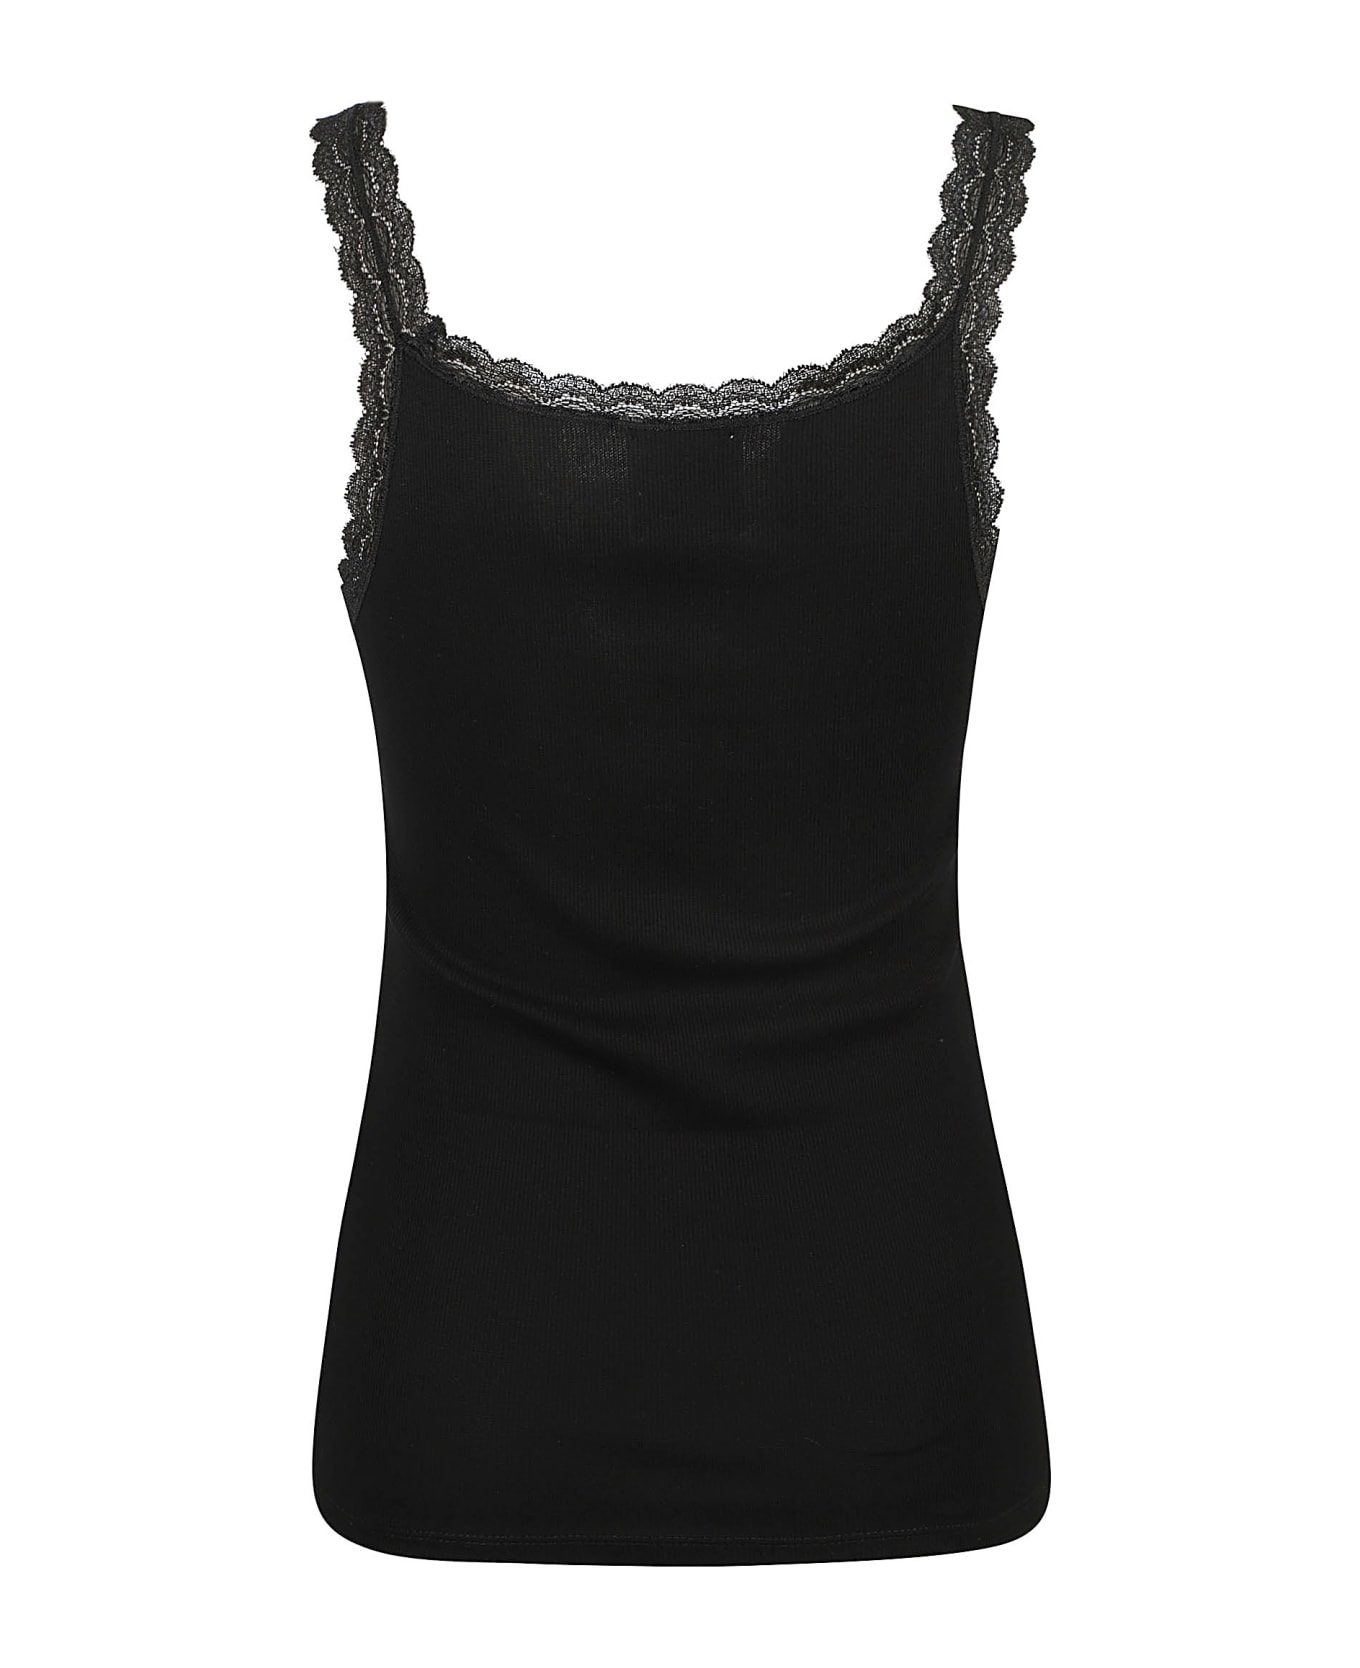 Allude Floral Laced Tank Top - Black